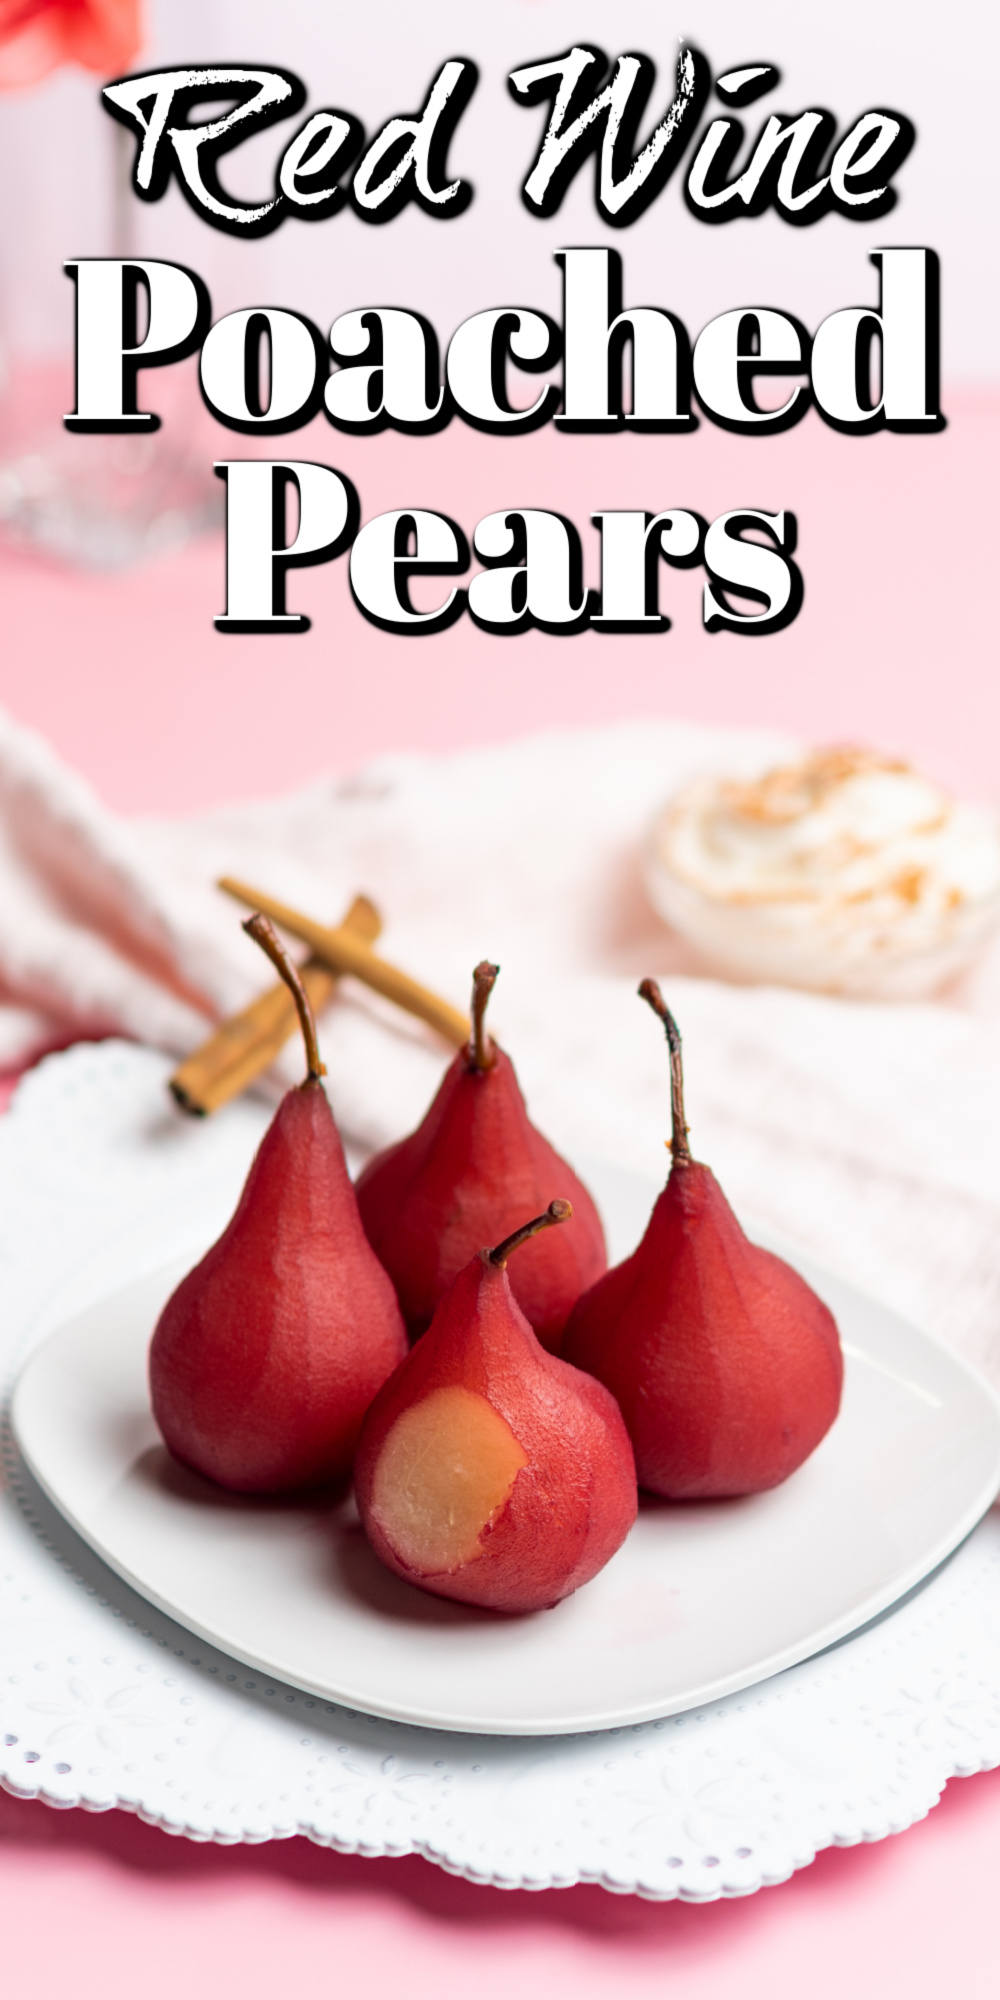 Red Wine Poached Pears Pin.